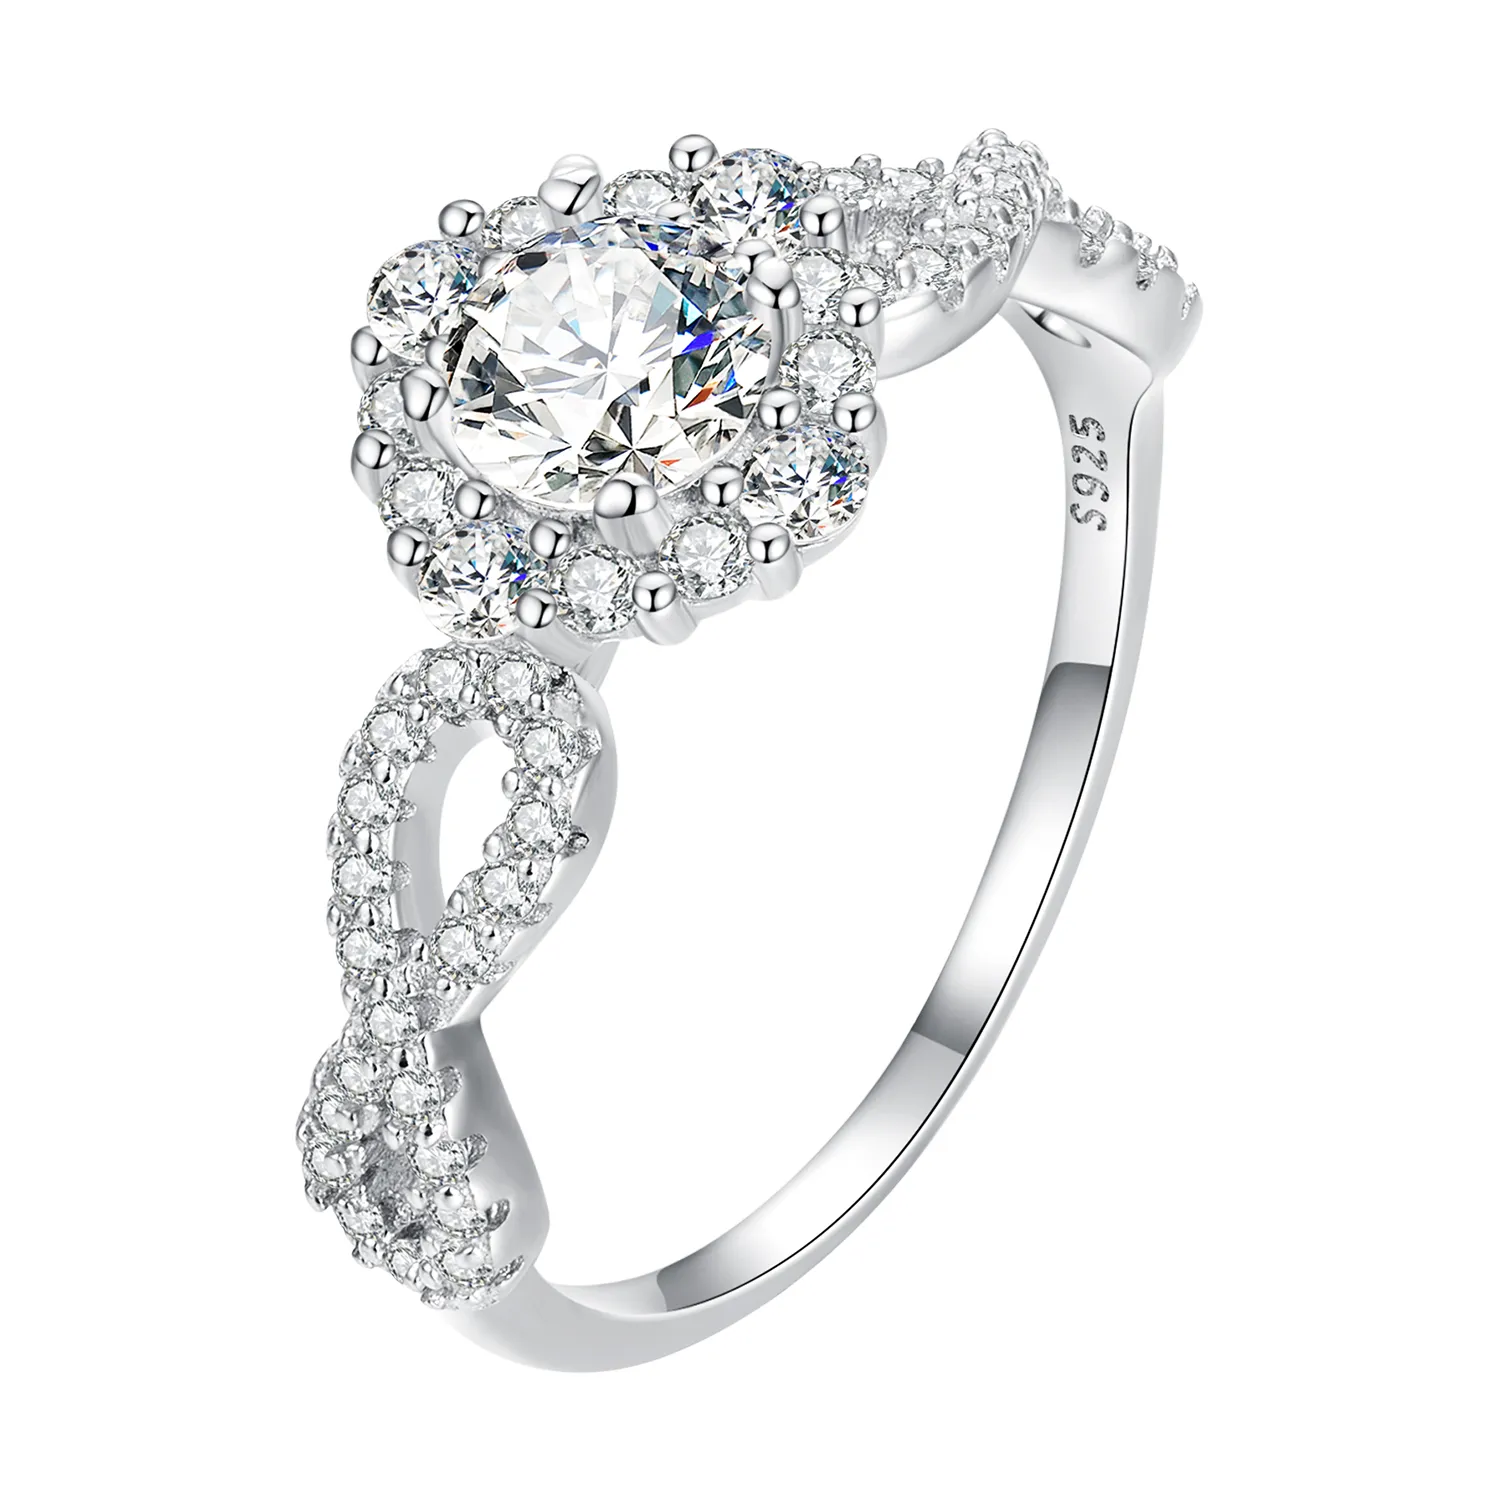 Pandora Style Classic Elegance Ring Clear Cz - BSR352